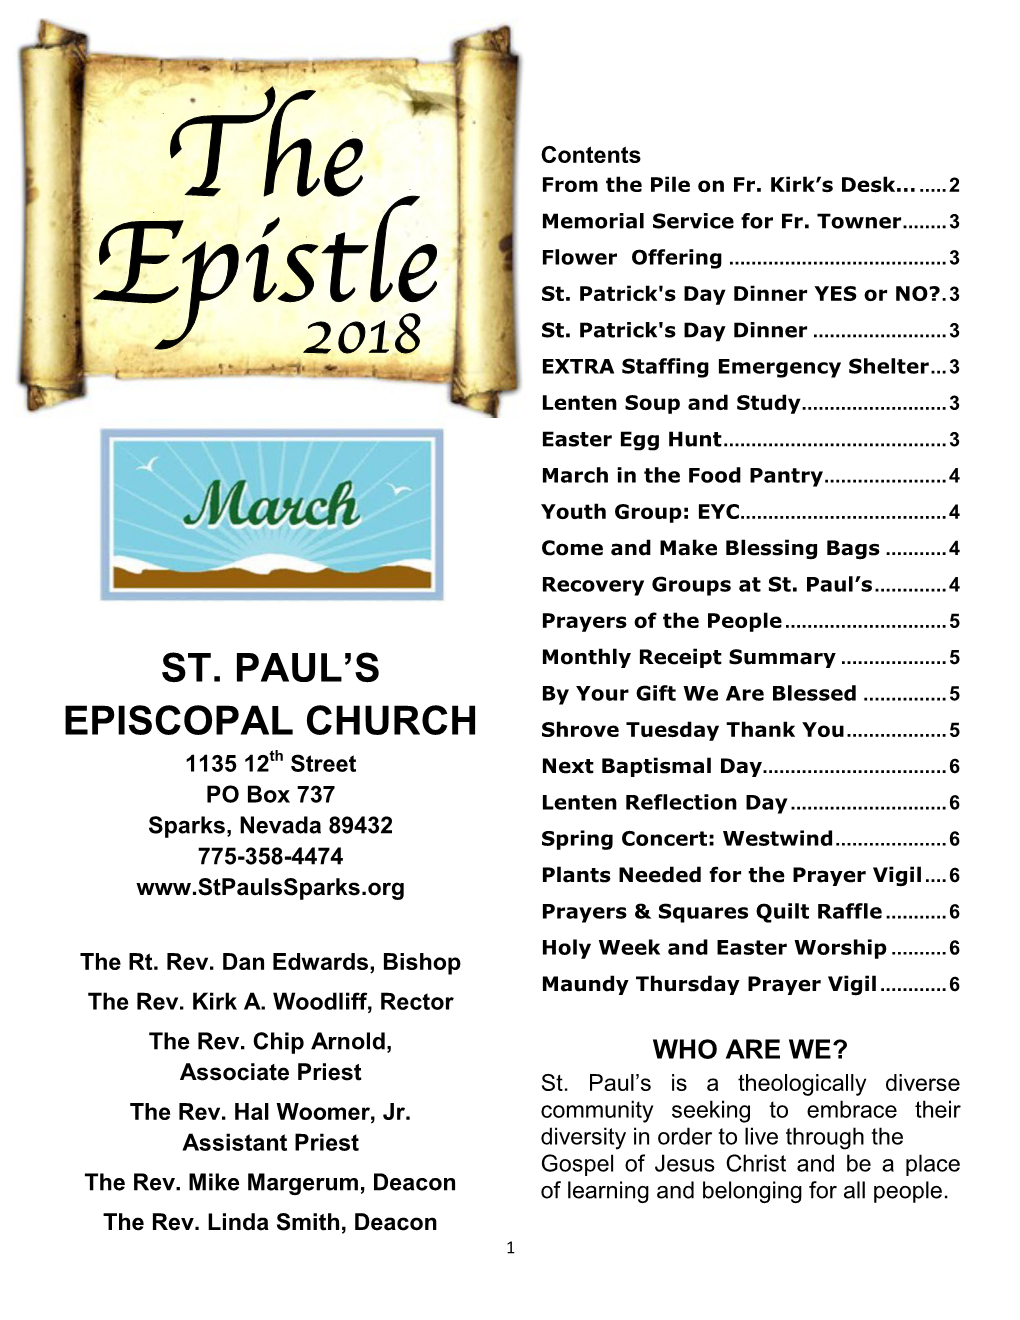 The Epistle. March 2018